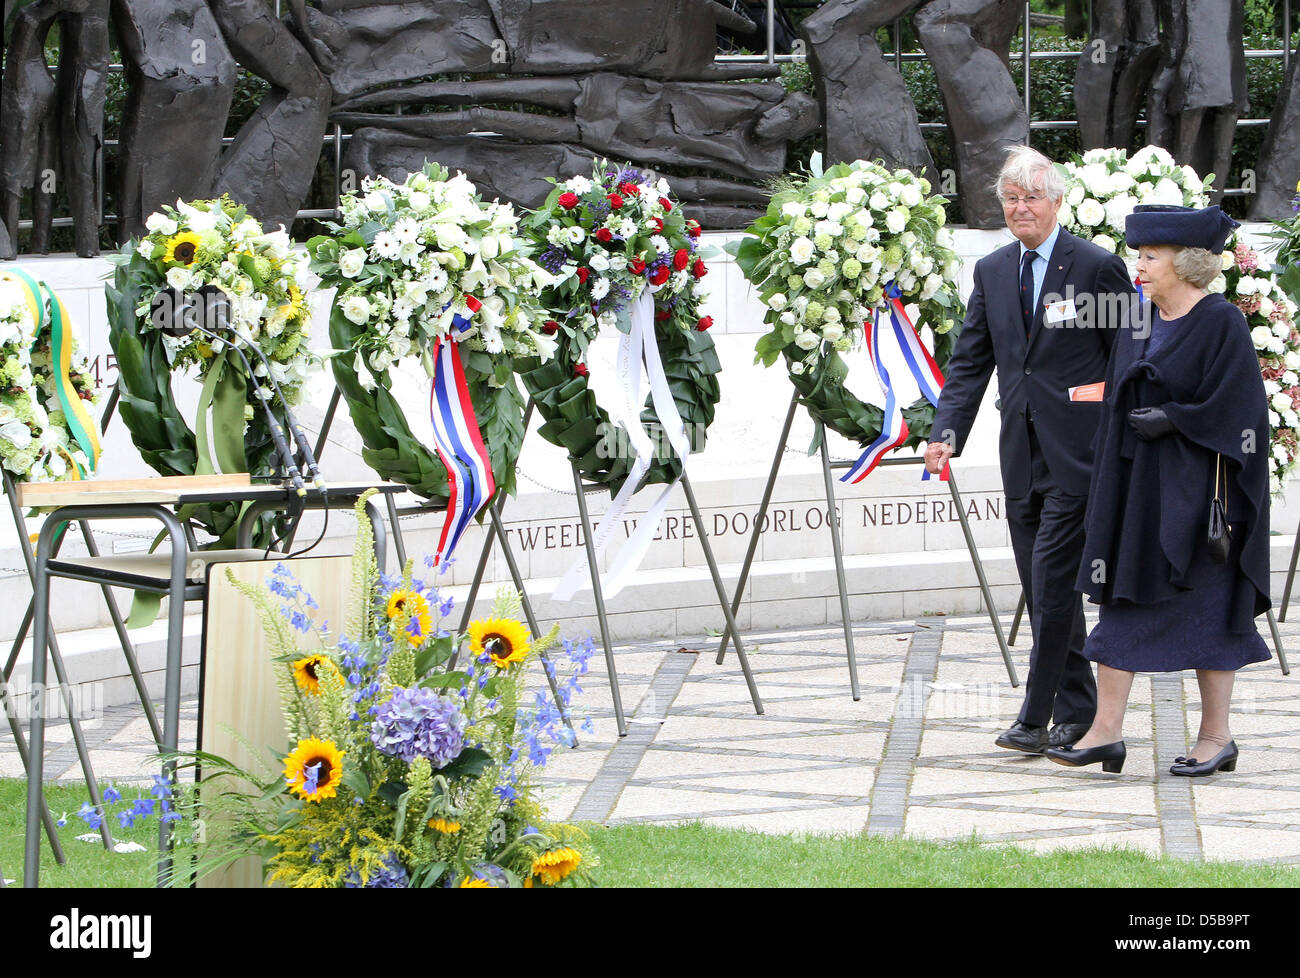 Dutch Queen Beatrix and Jan van Bodegom, president of the foundation 'Stichting Herdenking' attend the commemoration ceremony at the Indonesian Memorial Monument, The Hague, Netherlands, 15 August 2010. Photo: Albert Nieboer / NETHERLANDS OUT Stock Photo